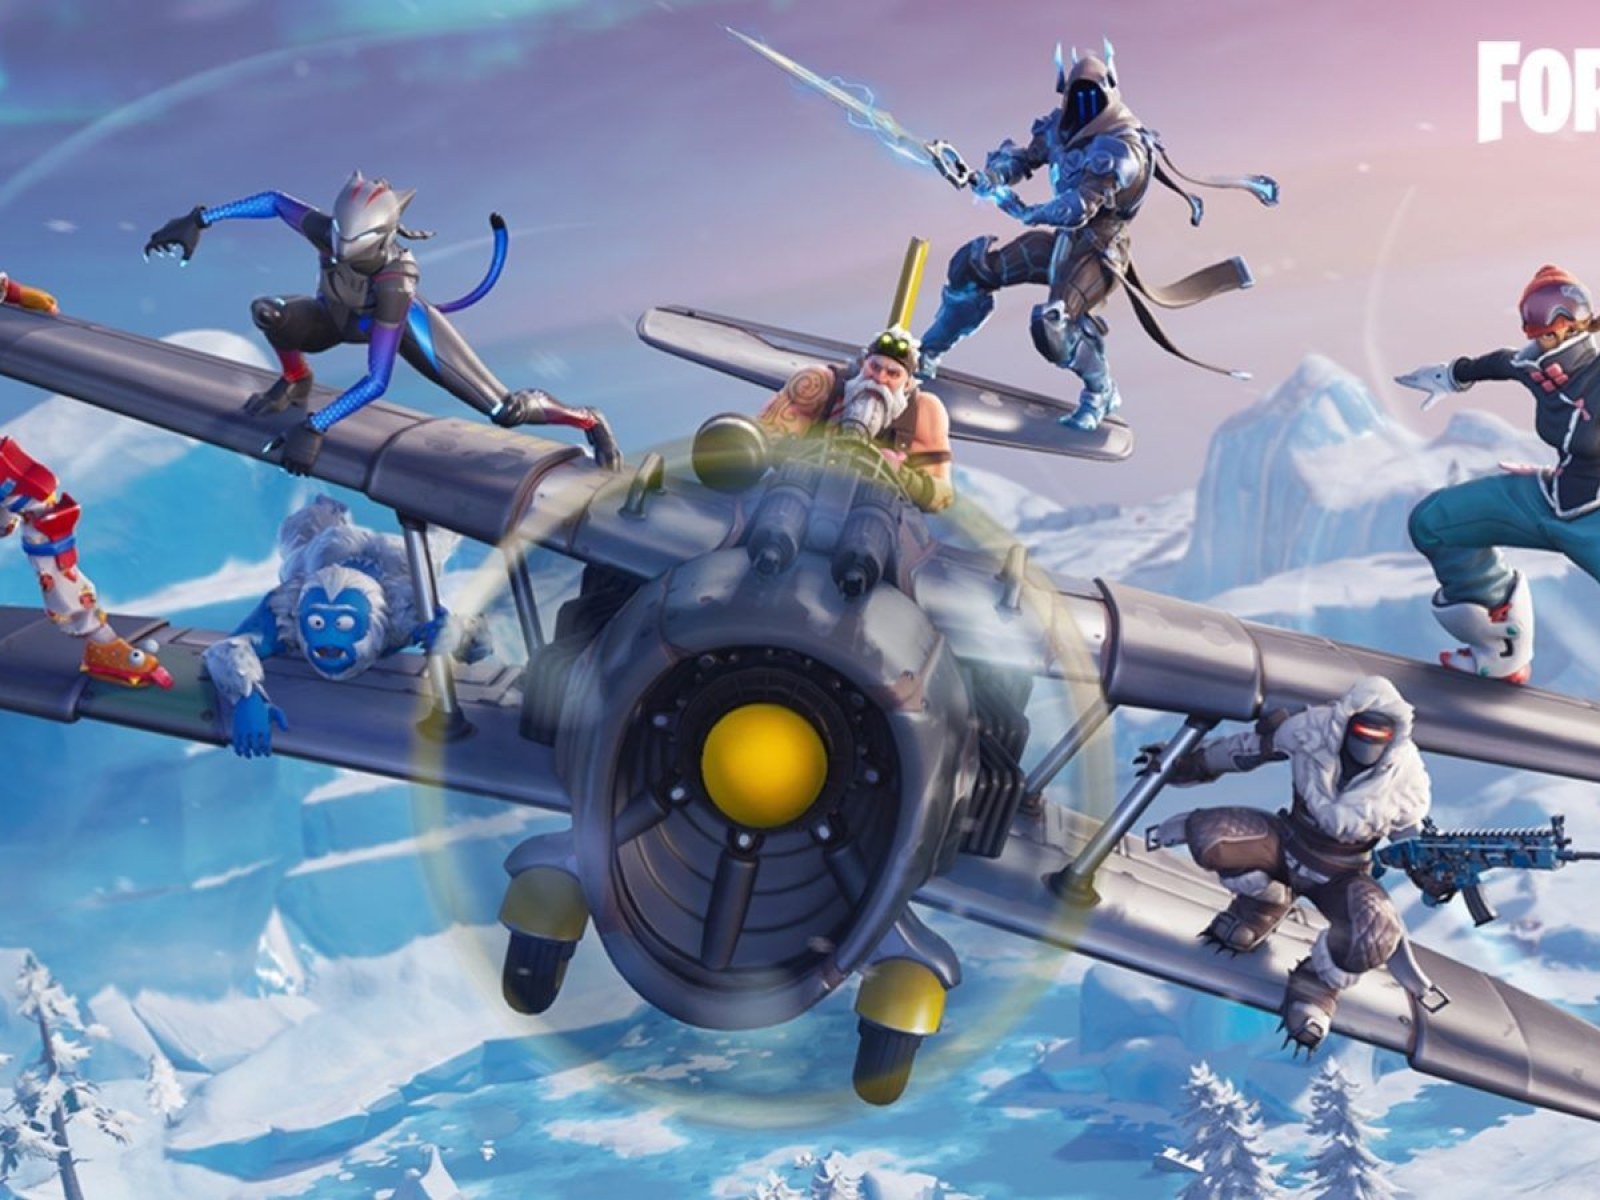 Fortnite Season 7 Battle Pass Skins Show Your Festive Cheer With